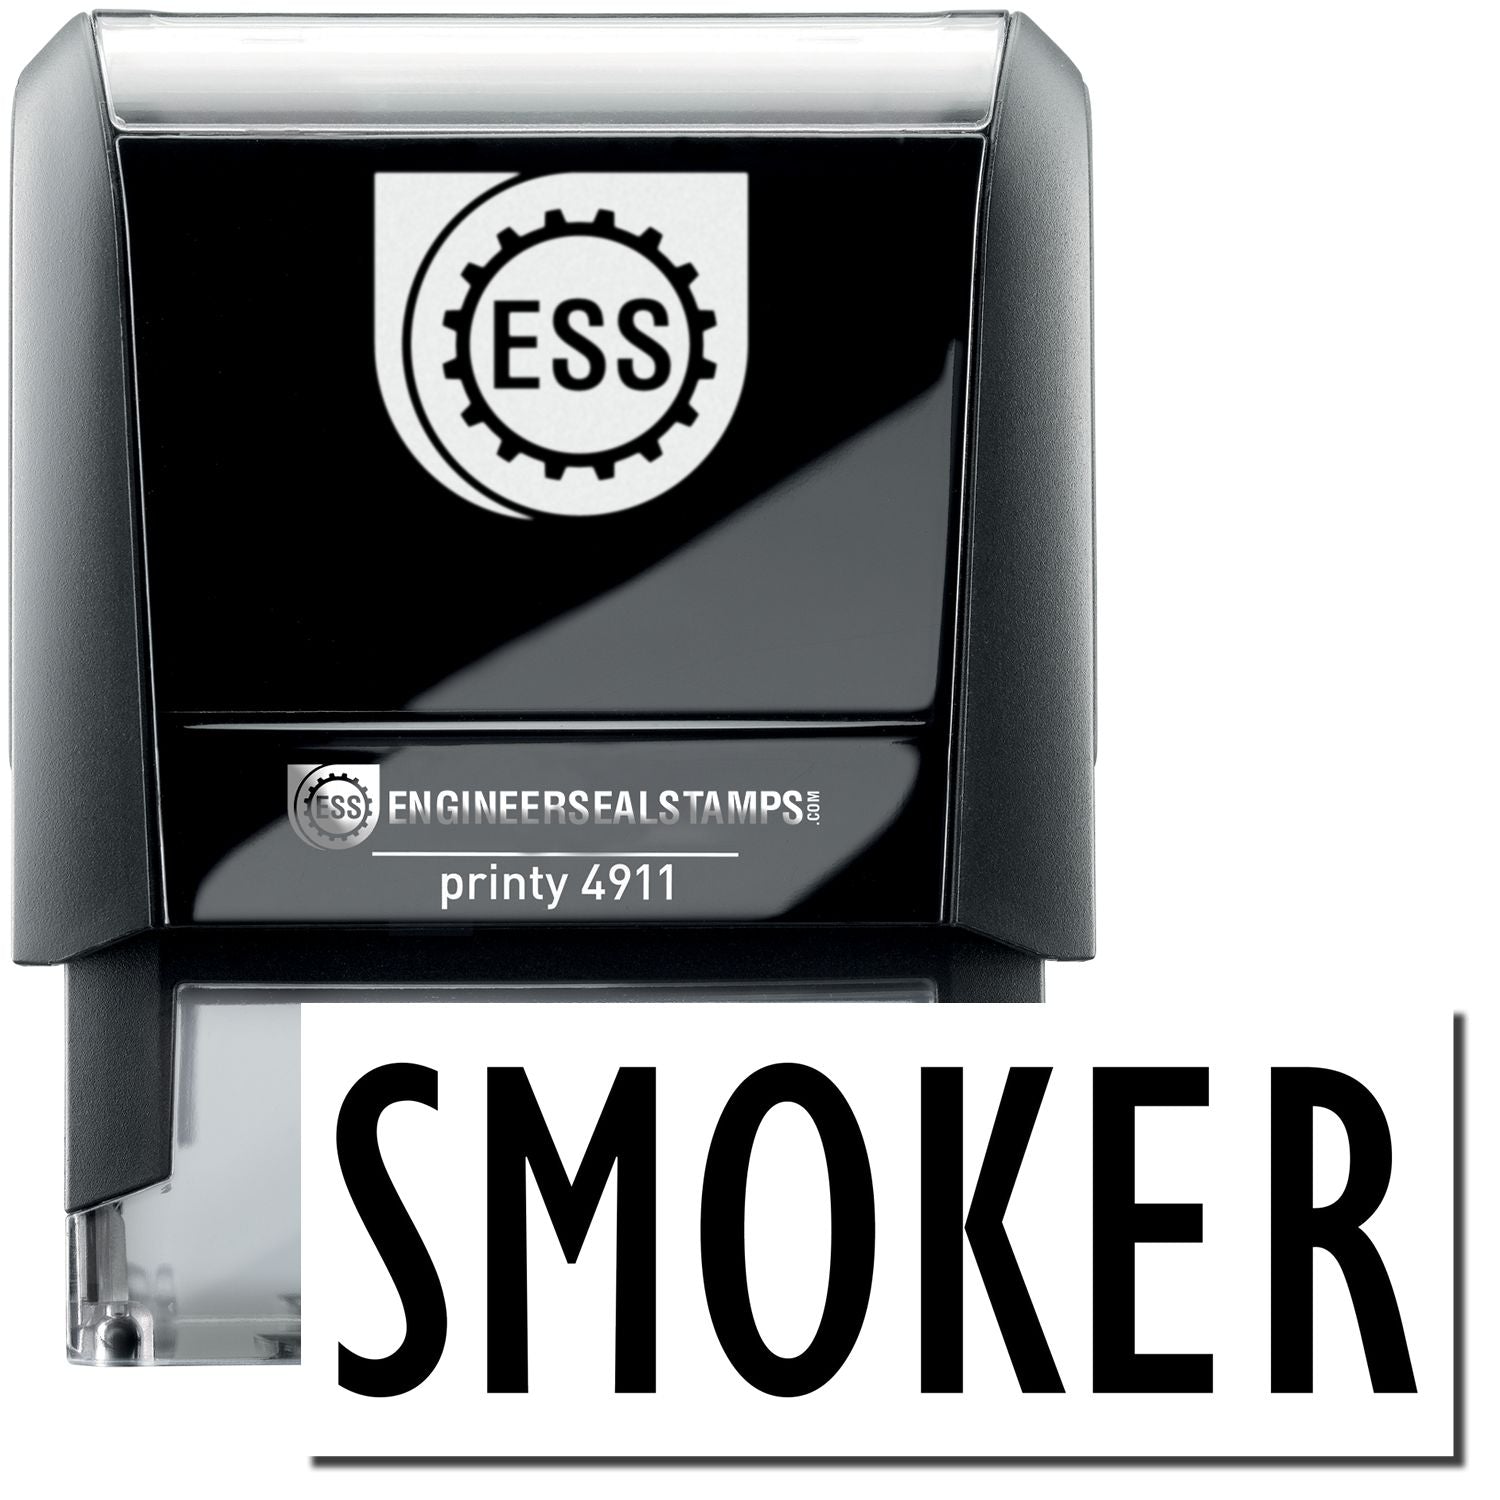 A self-inking stamp with a stamped image showing how the text "SMOKER" is displayed after stamping.